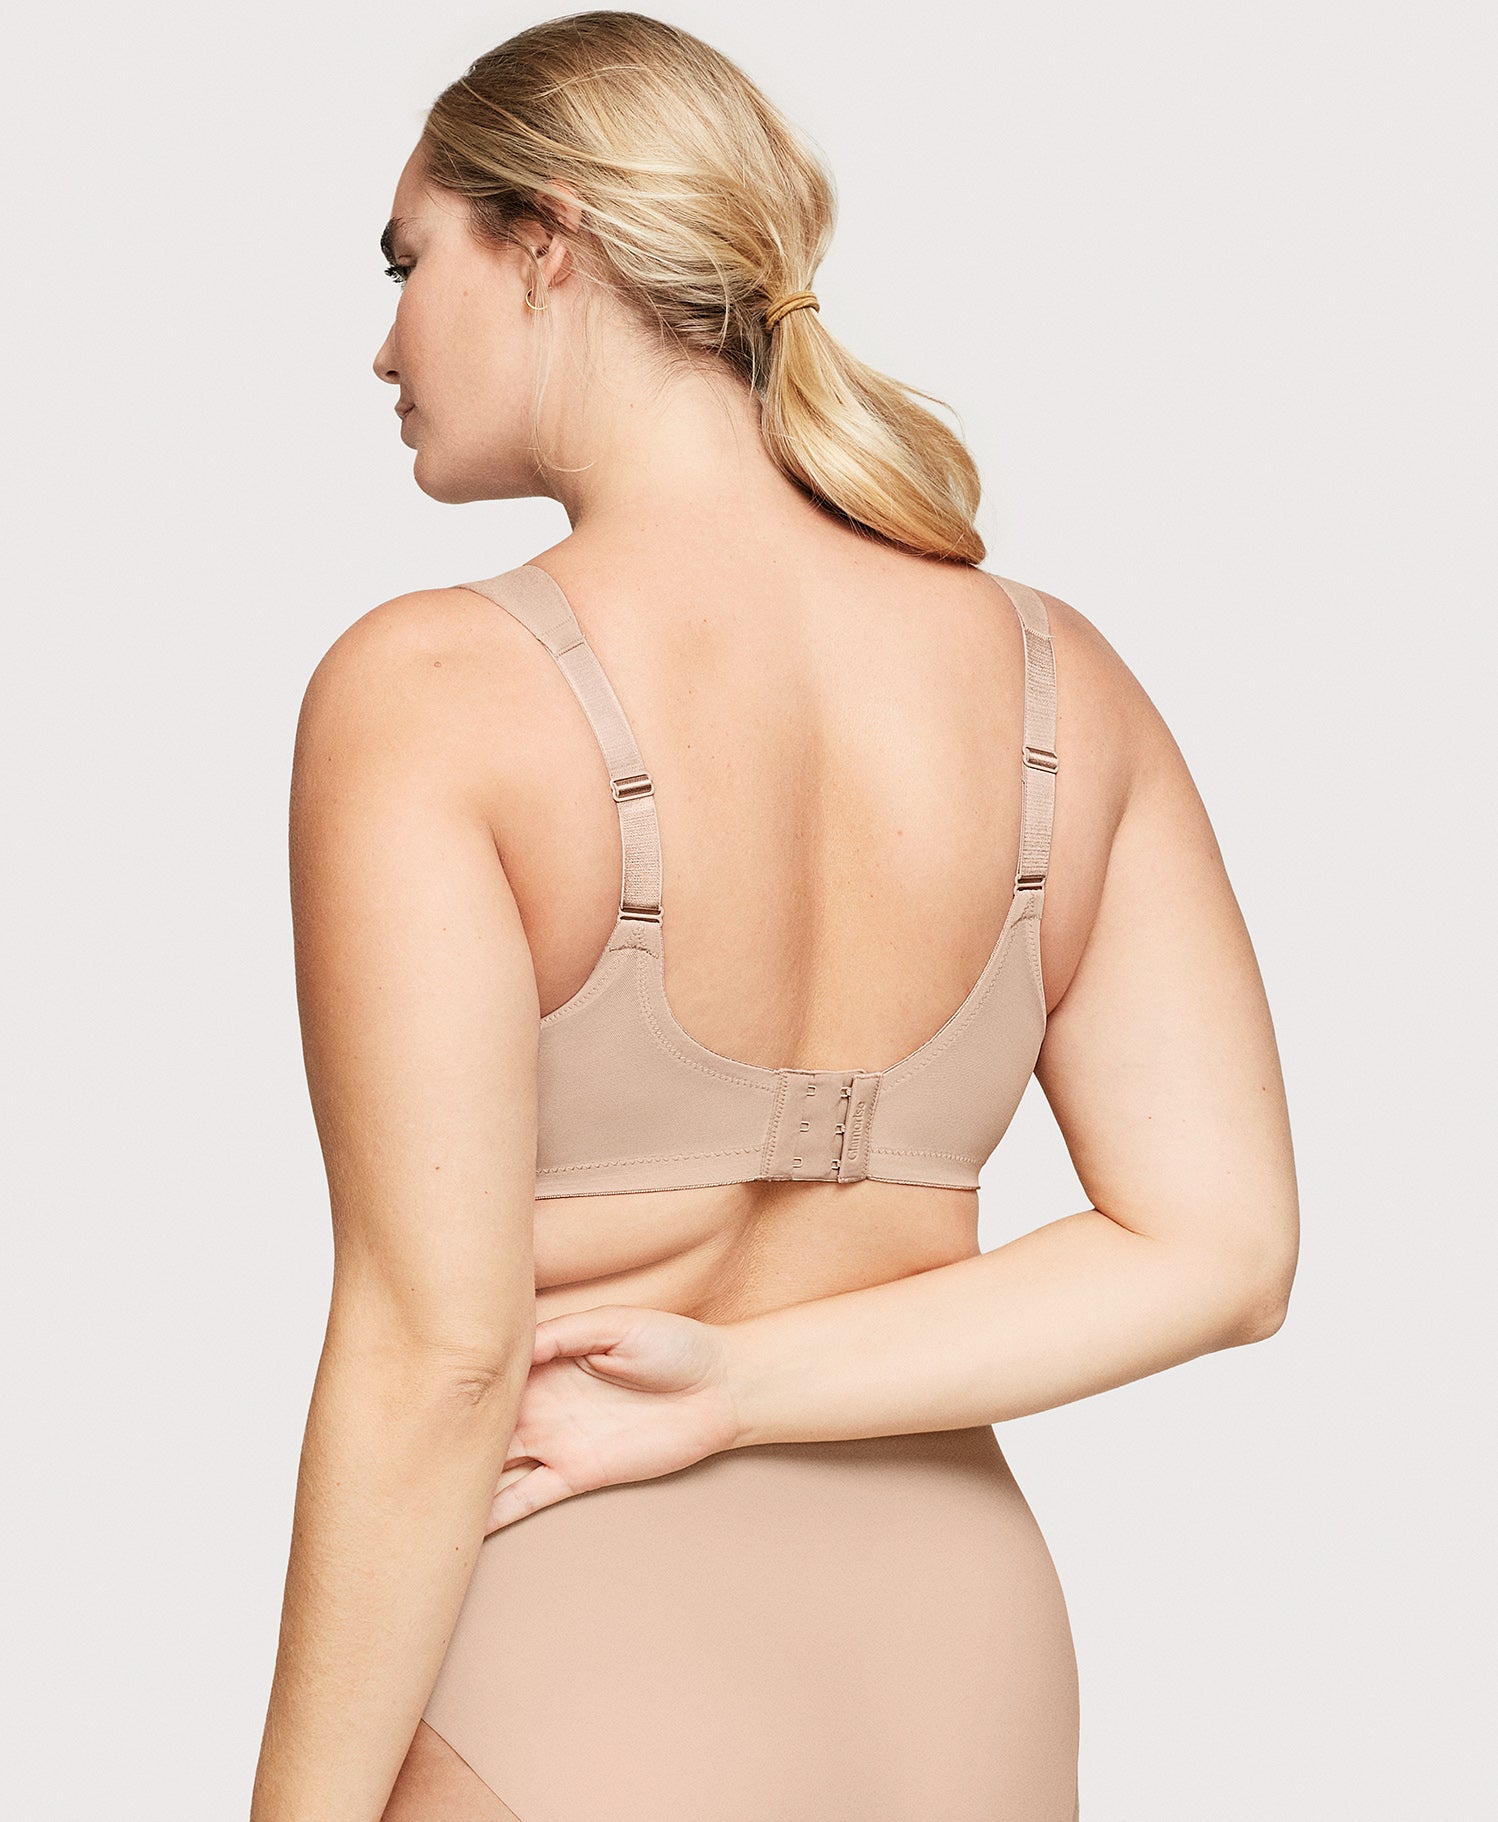 Shop Tu Clothing Women's Seamless Bras up to 70% Off